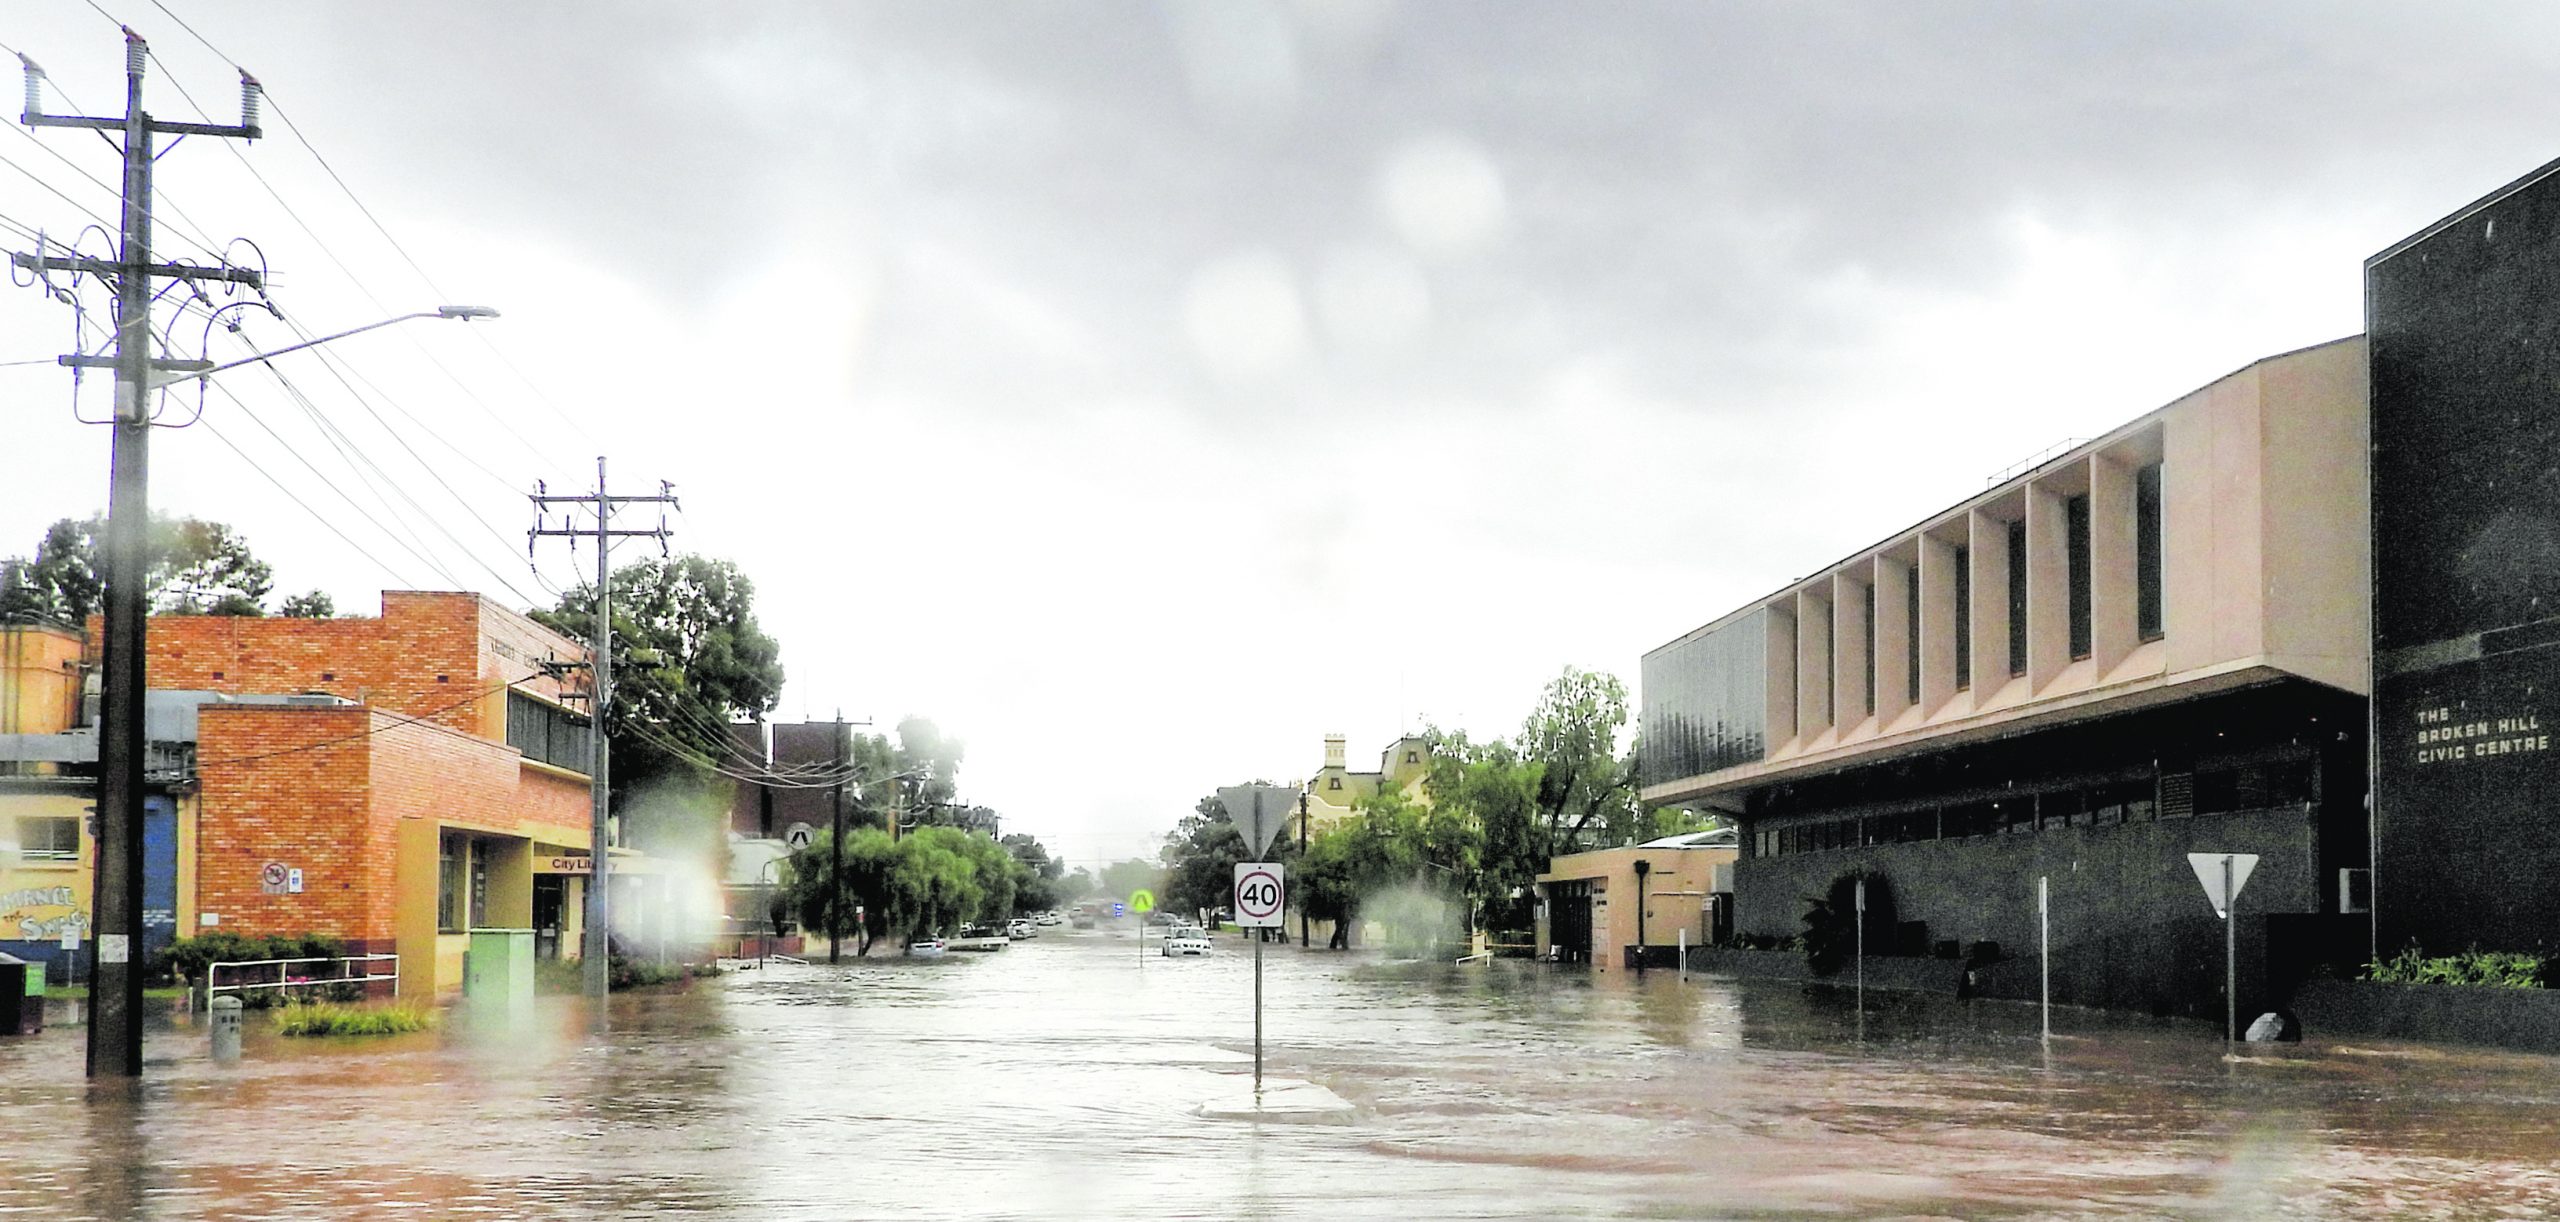 Tuesday’s storm gave Broken Hill a taste of the Venice lifestyle. PICTURE: EVE-LYN KENNEDY